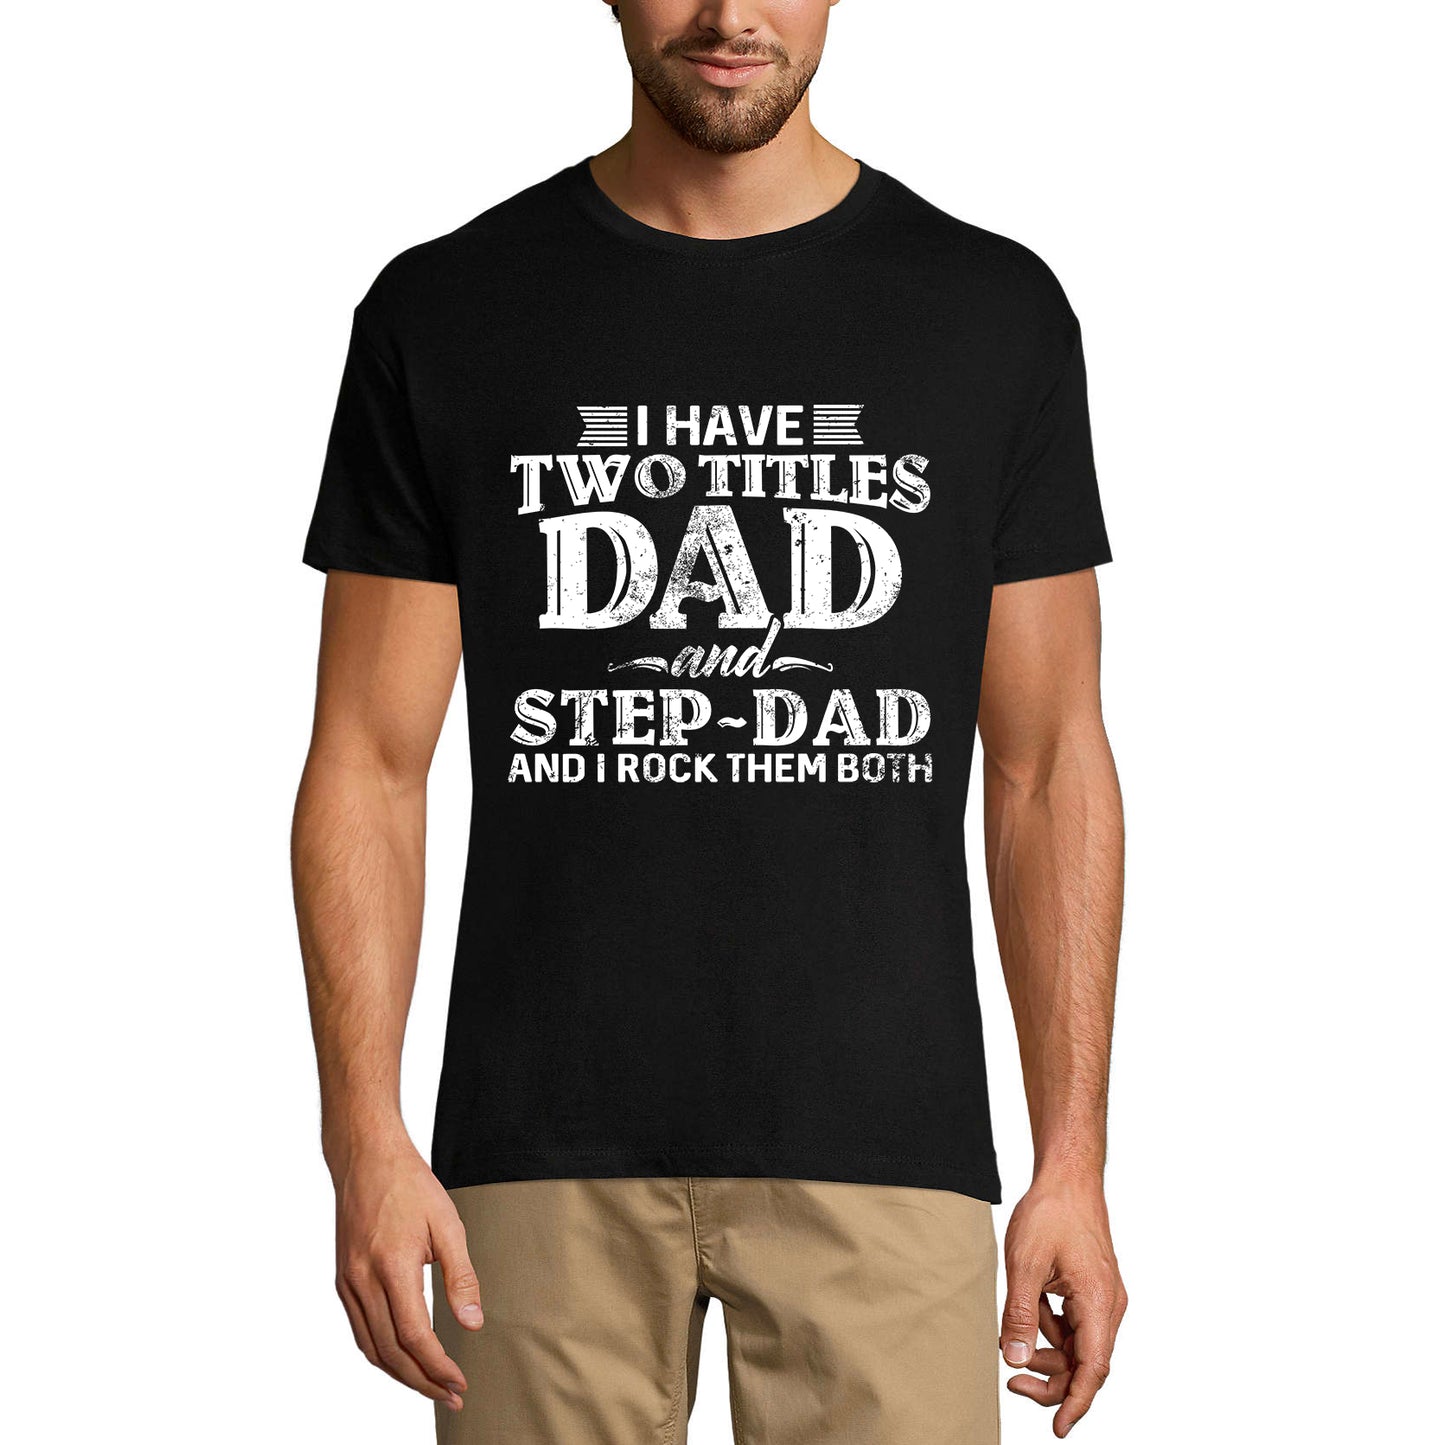 ULTRABASIC Men's Graphic T-Shirt I Have Two Titles Dad and Step-Dad - I Rock Them Both